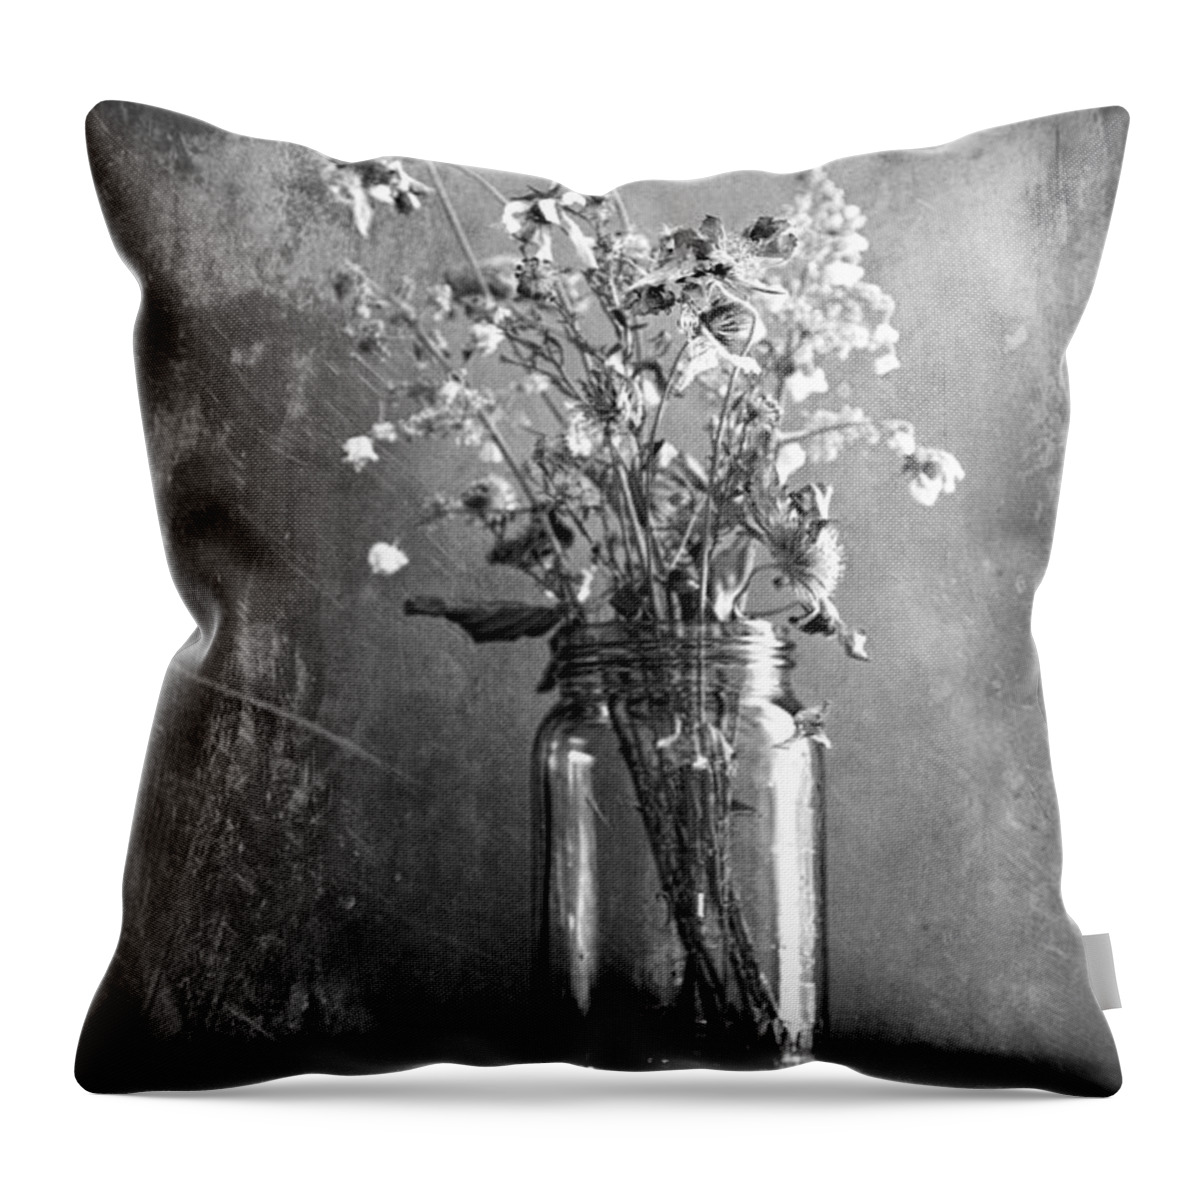 Vintage Jar Throw Pillow featuring the photograph Remains Of The Season by Theresa Tahara